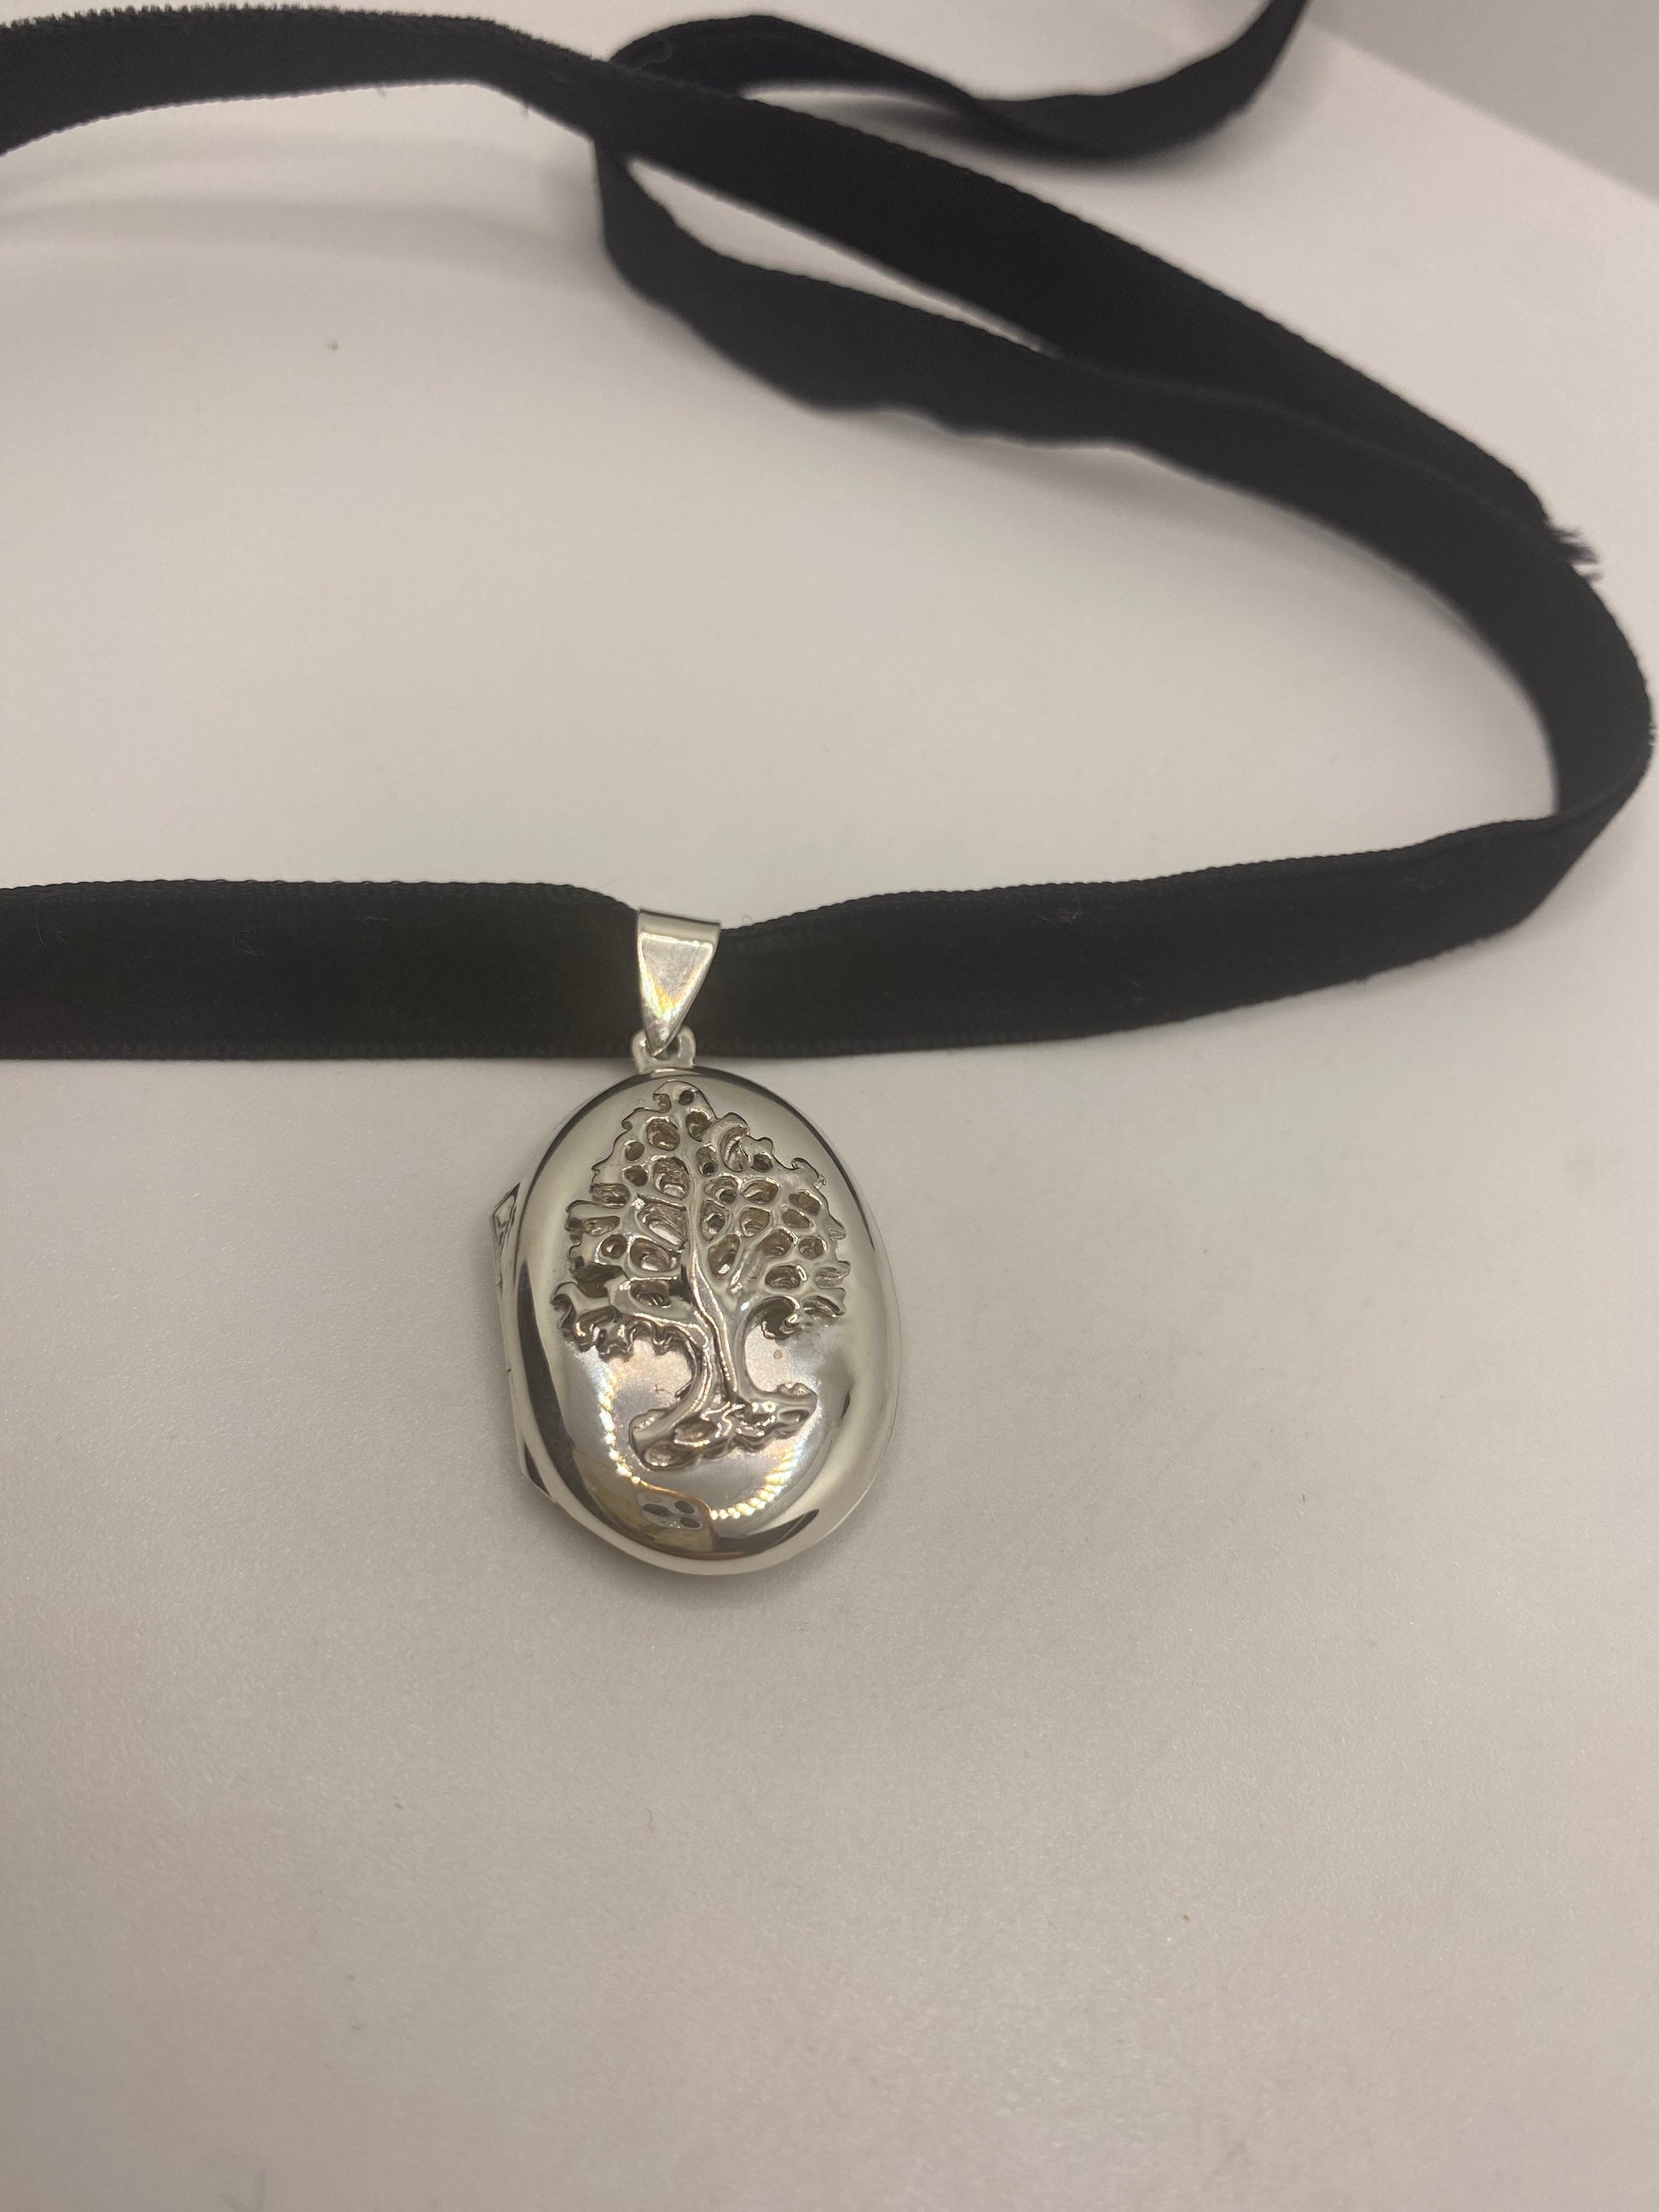 Vintage Tree of Life Locket Choker 925 Sterling Silver necklace